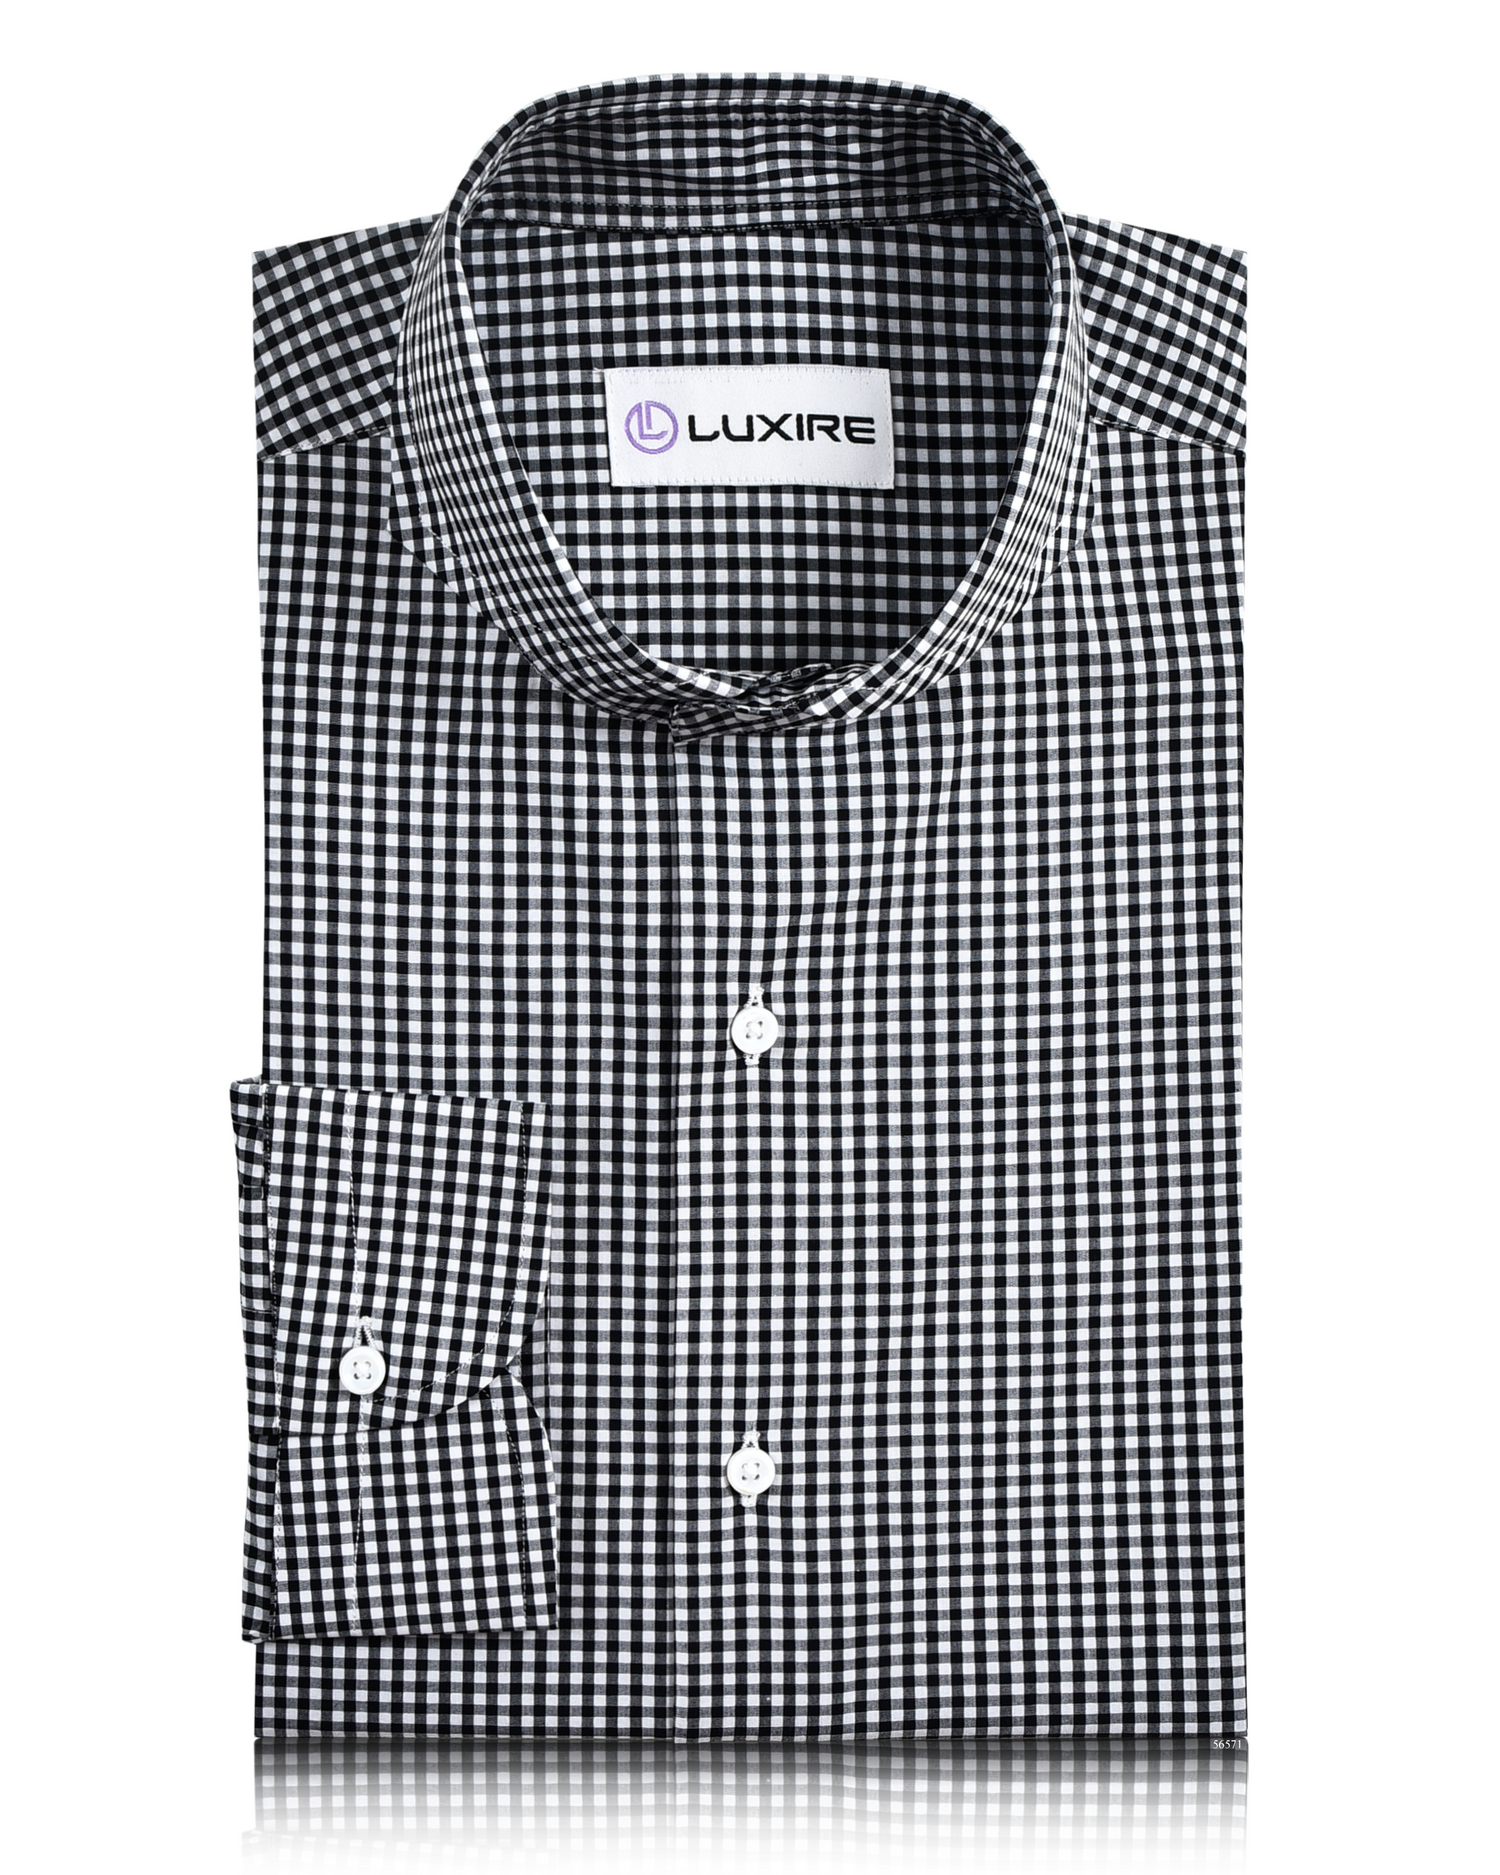 Front view of custom check shirts for men by Luxire black and white gingham